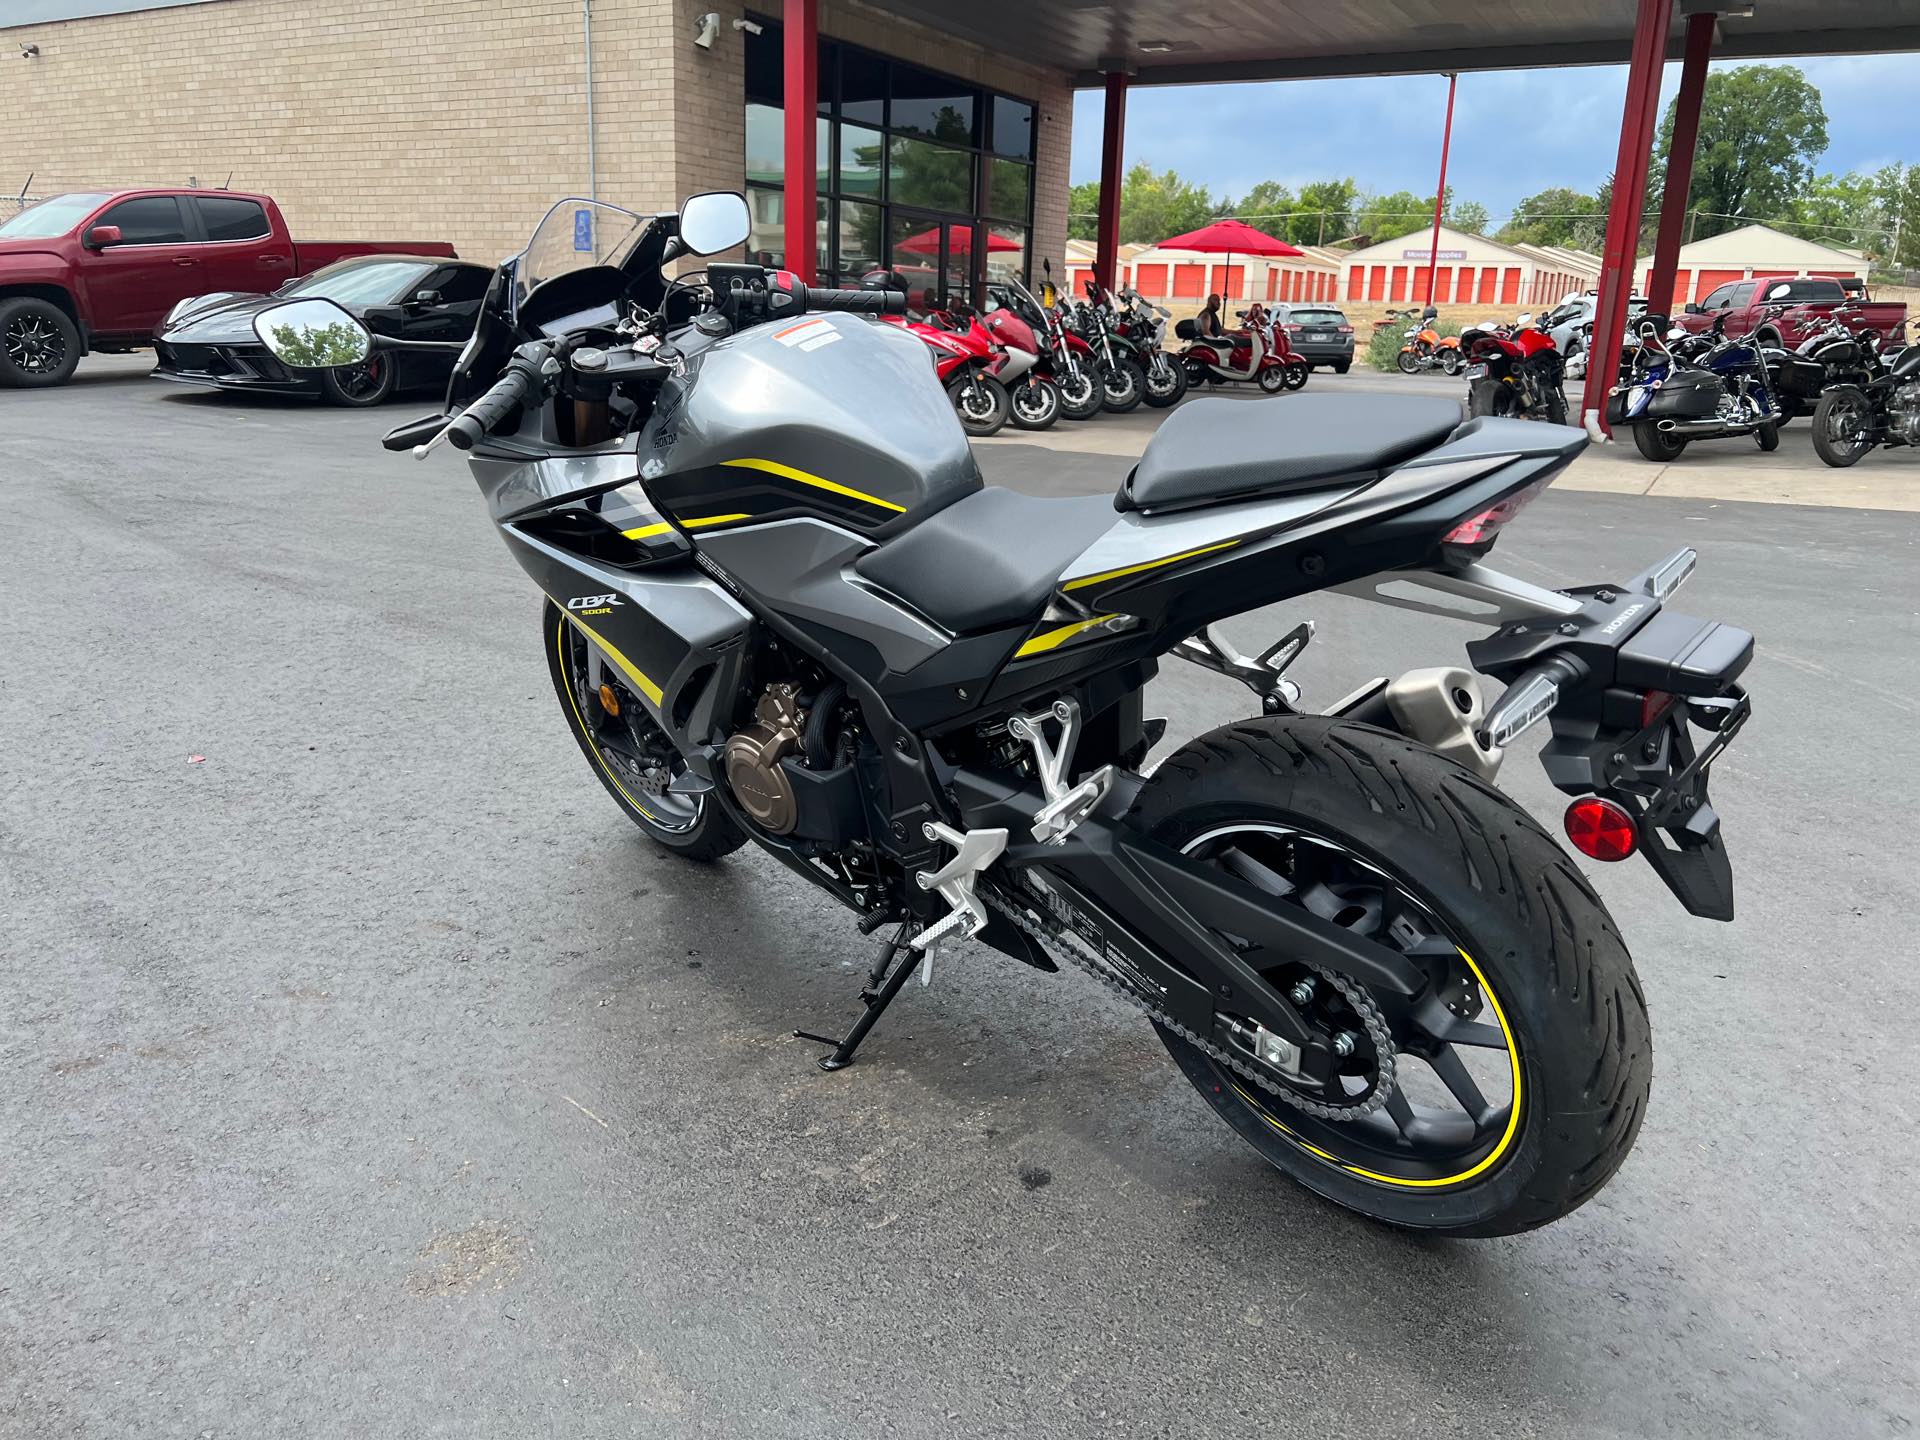 2022 Honda CBR500R ABS at Aces Motorcycles - Fort Collins